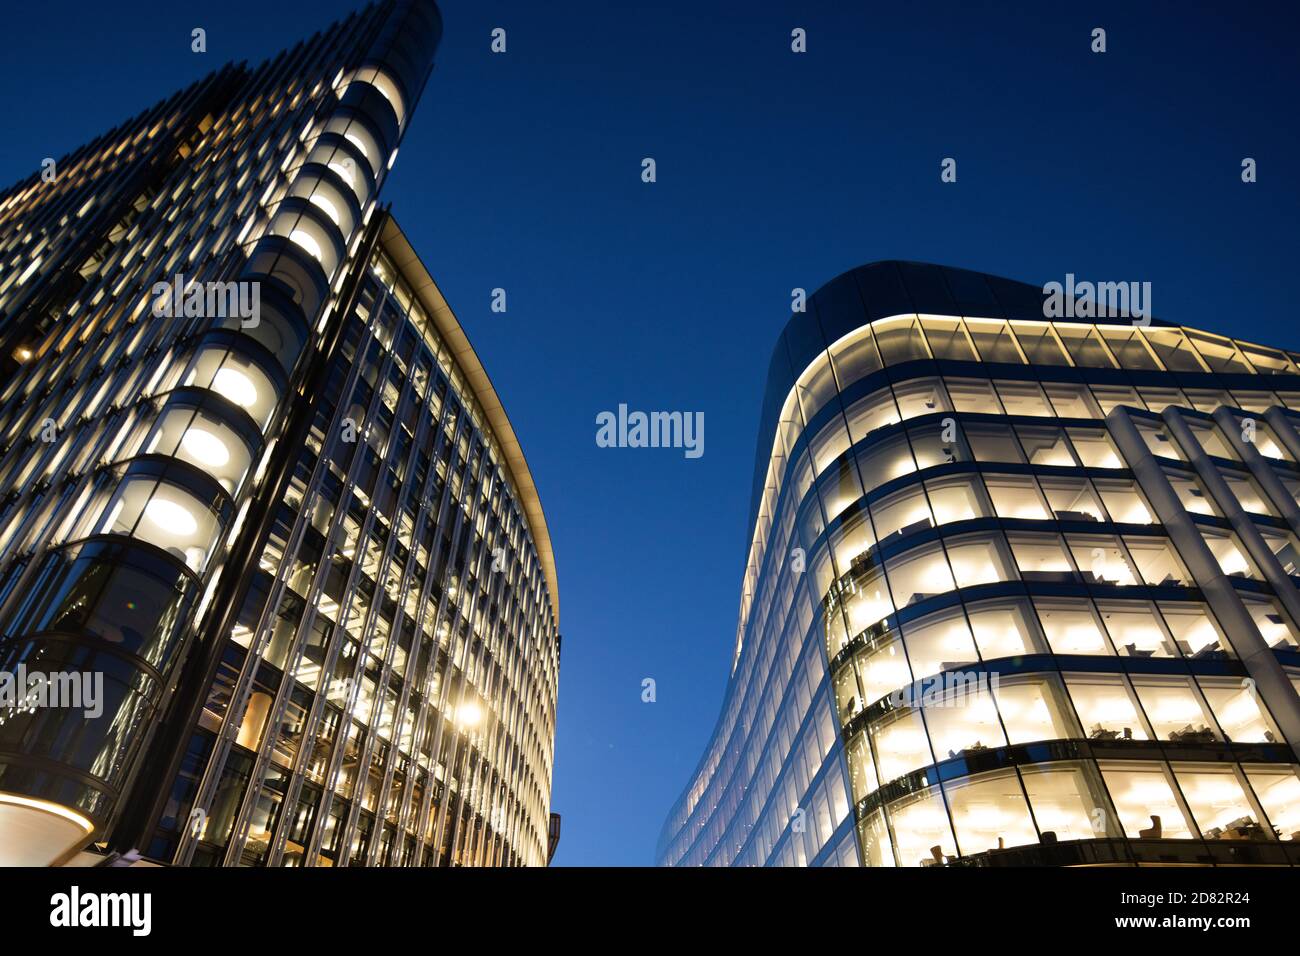 Deloitte LLP Corporate office and Goldman Sachs International Investment Banking London headquarters Stock Photo